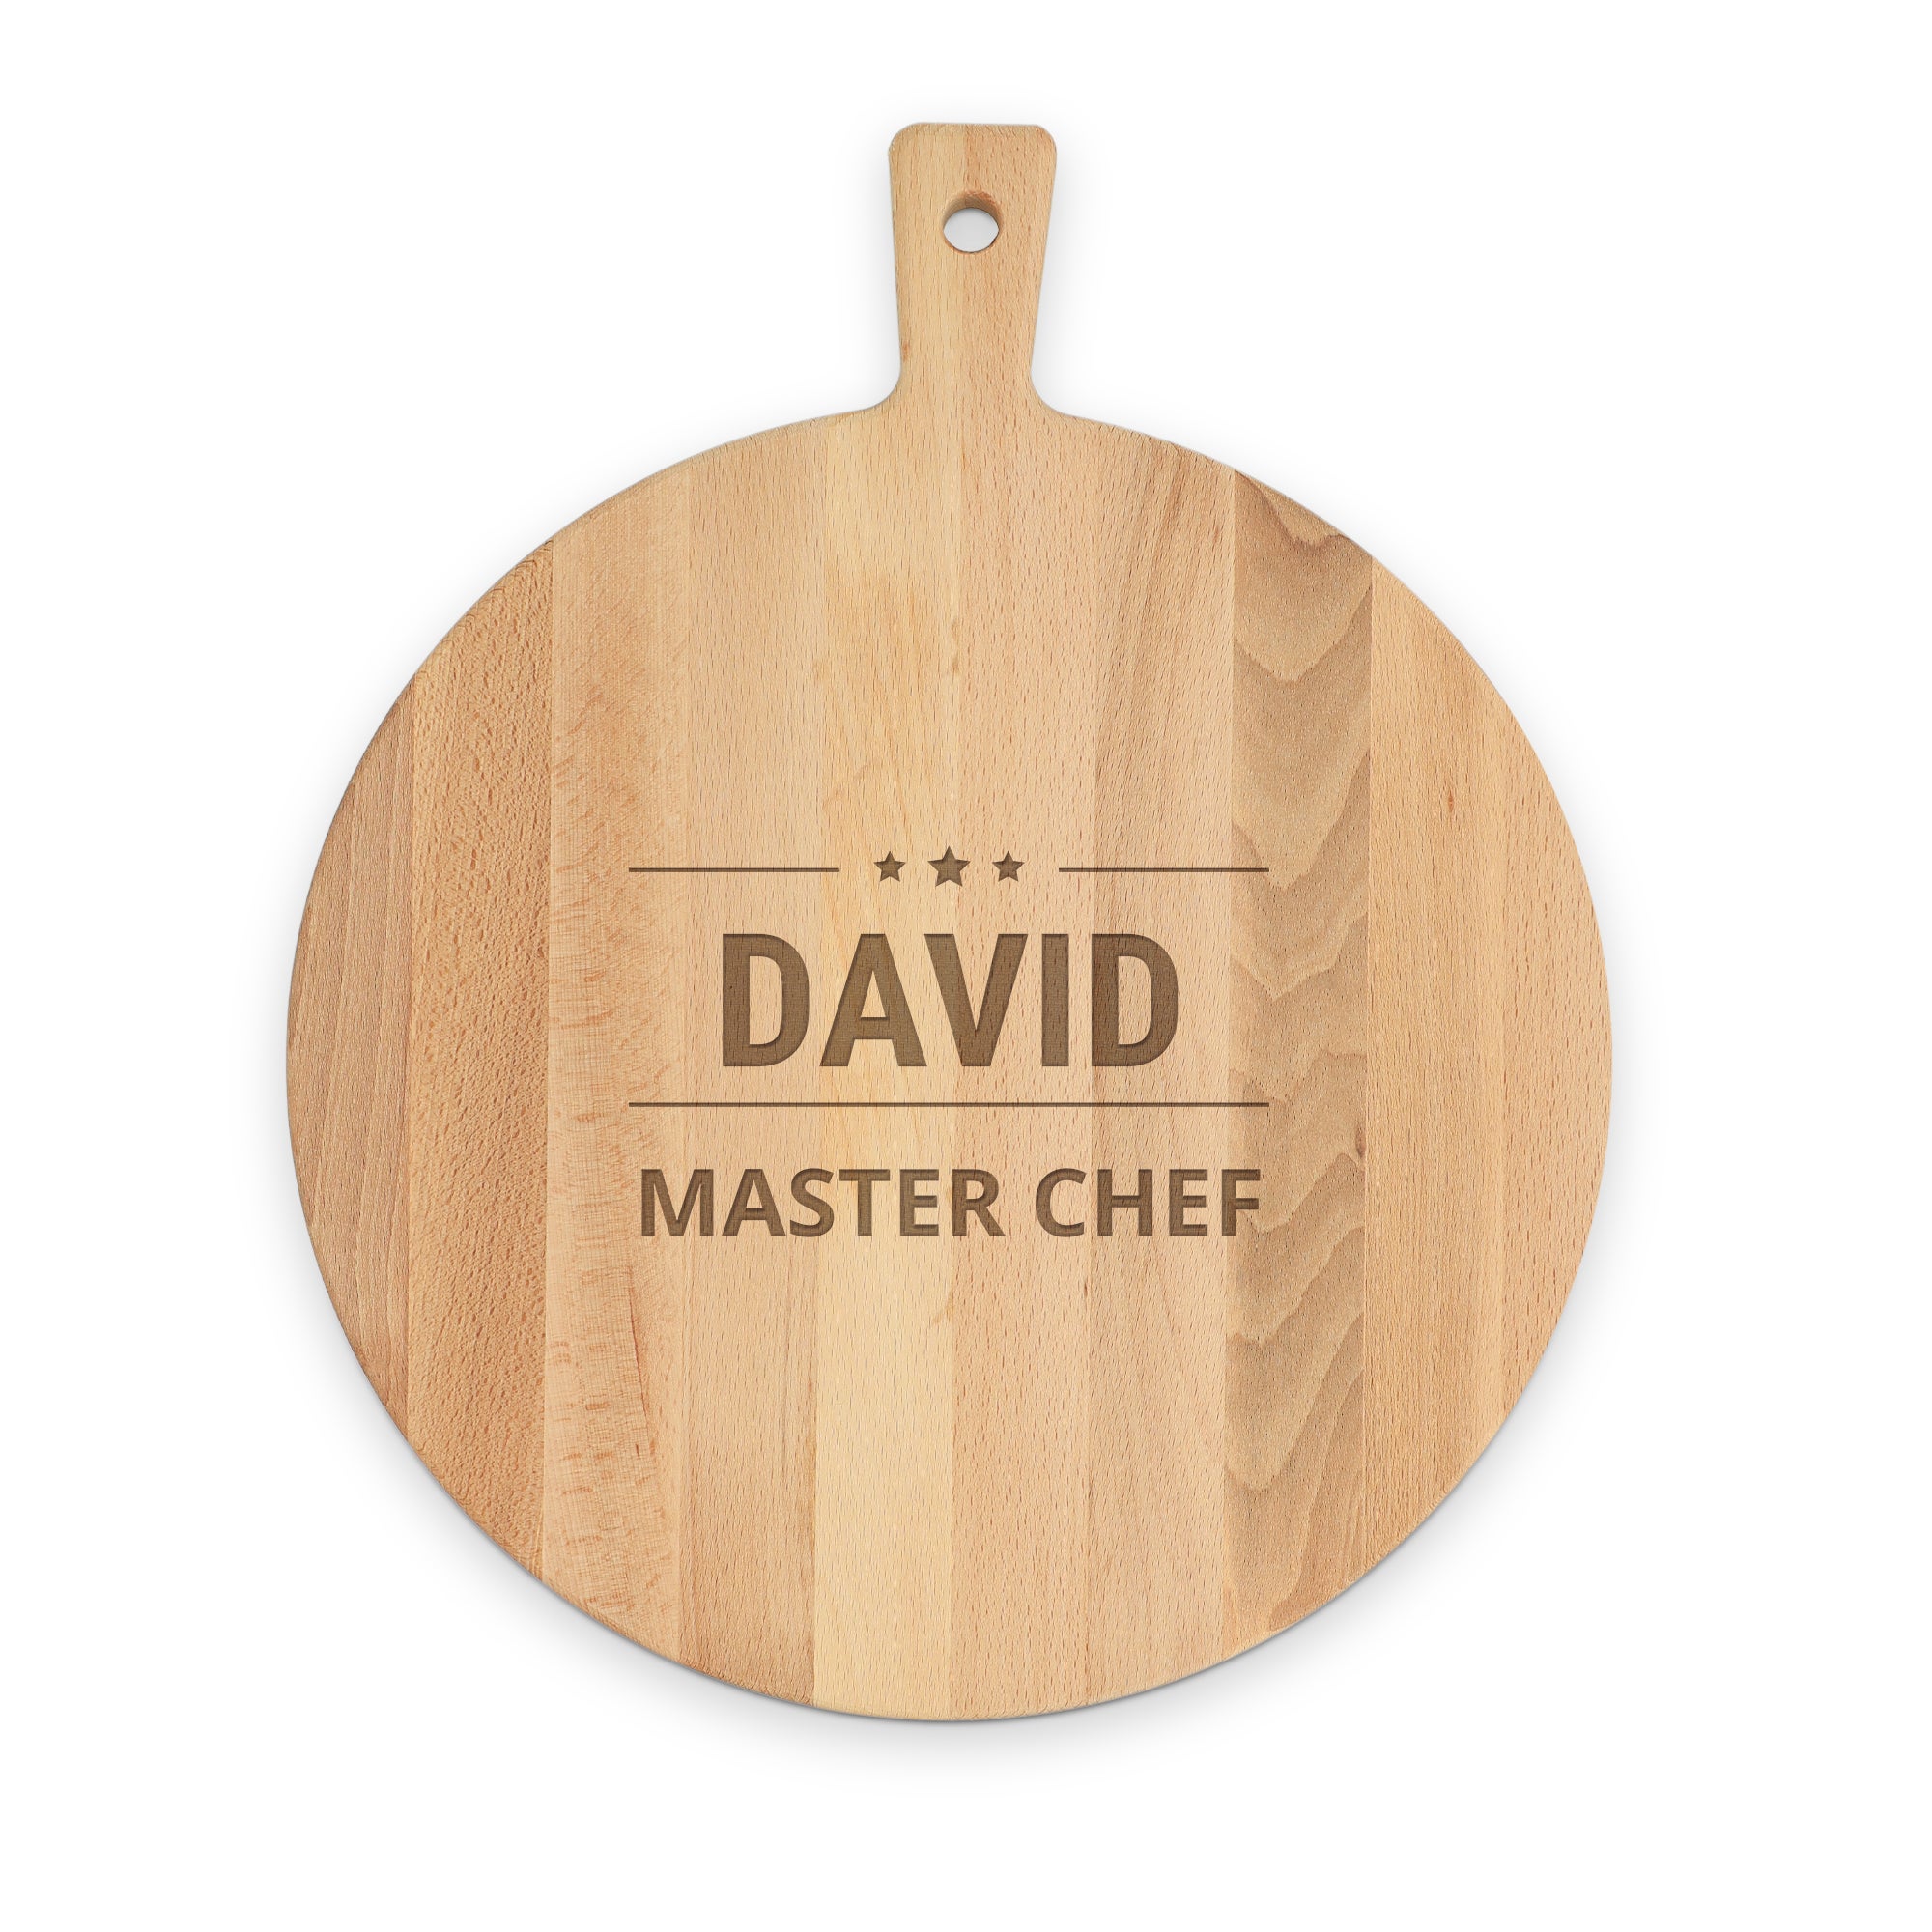 Personalised serving platter - Beech - Round - L - Engraved